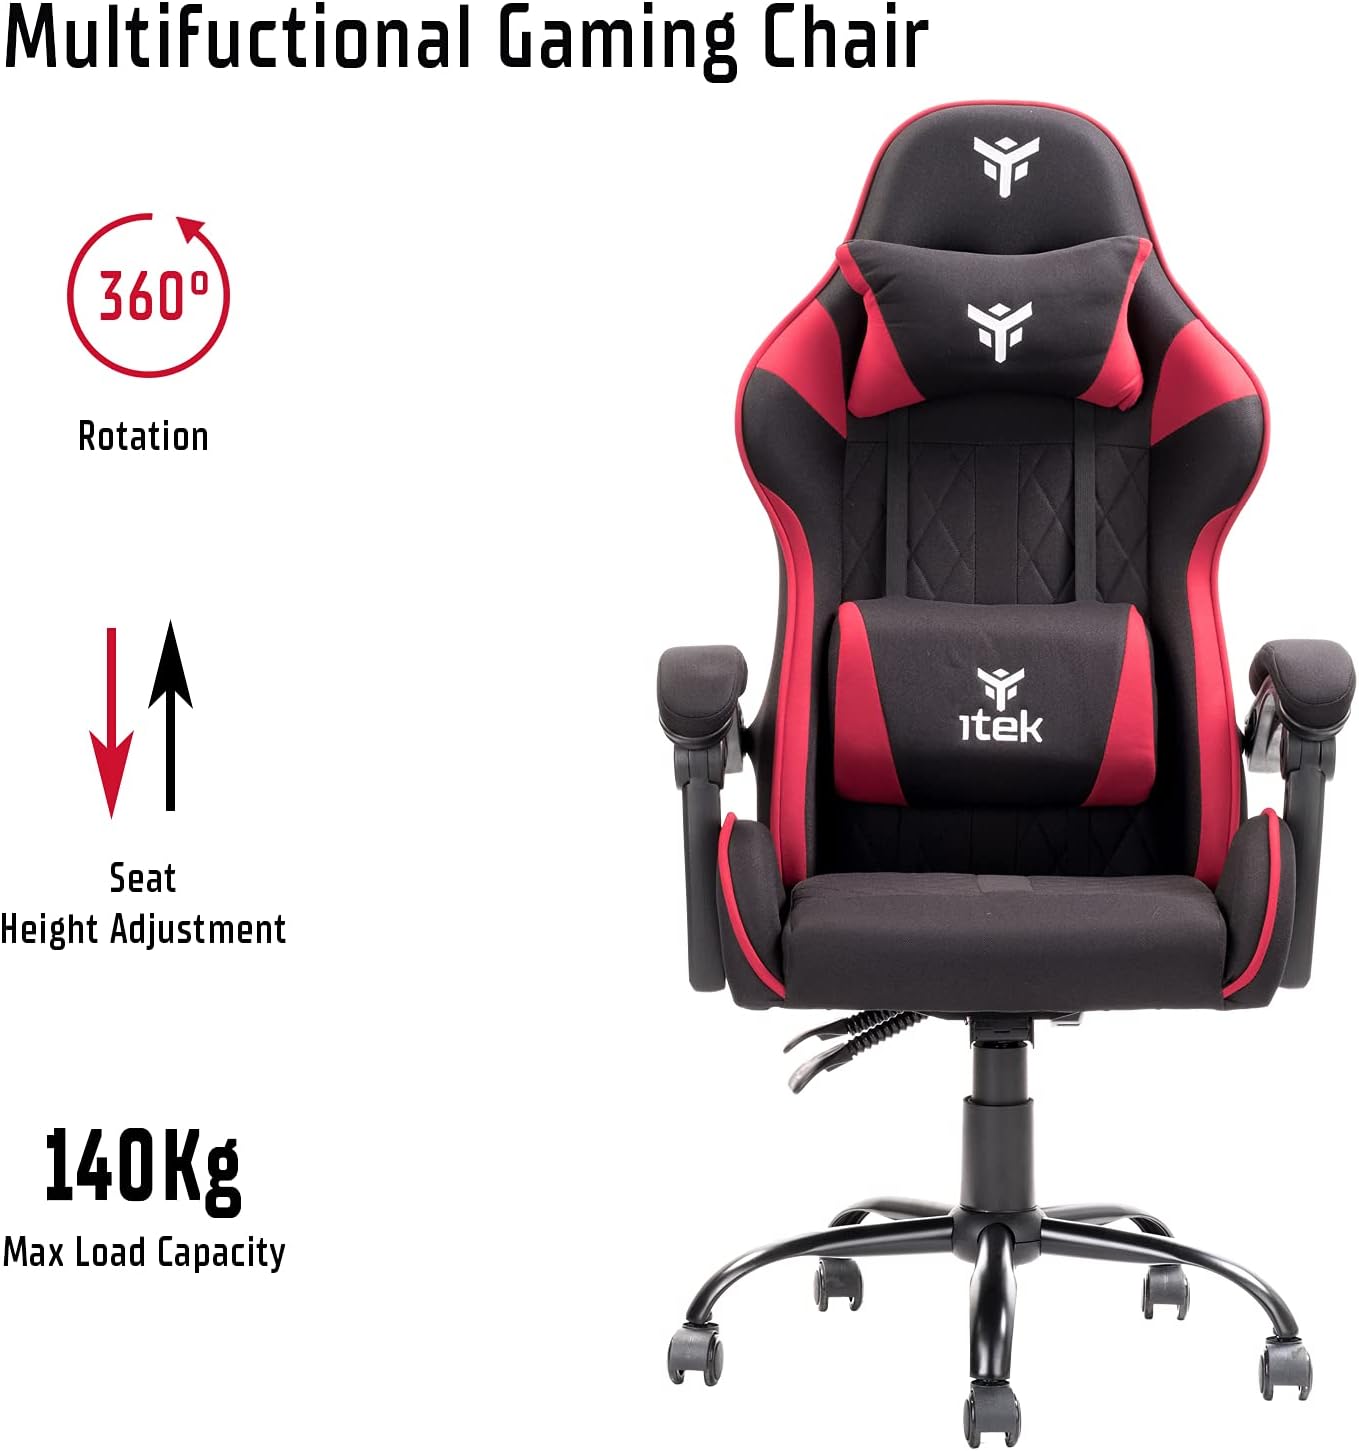 ITEK BLACK/RED GAMING SEAT IN FABRIC, RECLINING BACKREST, DOUBLE CUSHION, Gaming Chair RHOMBUS FF10 